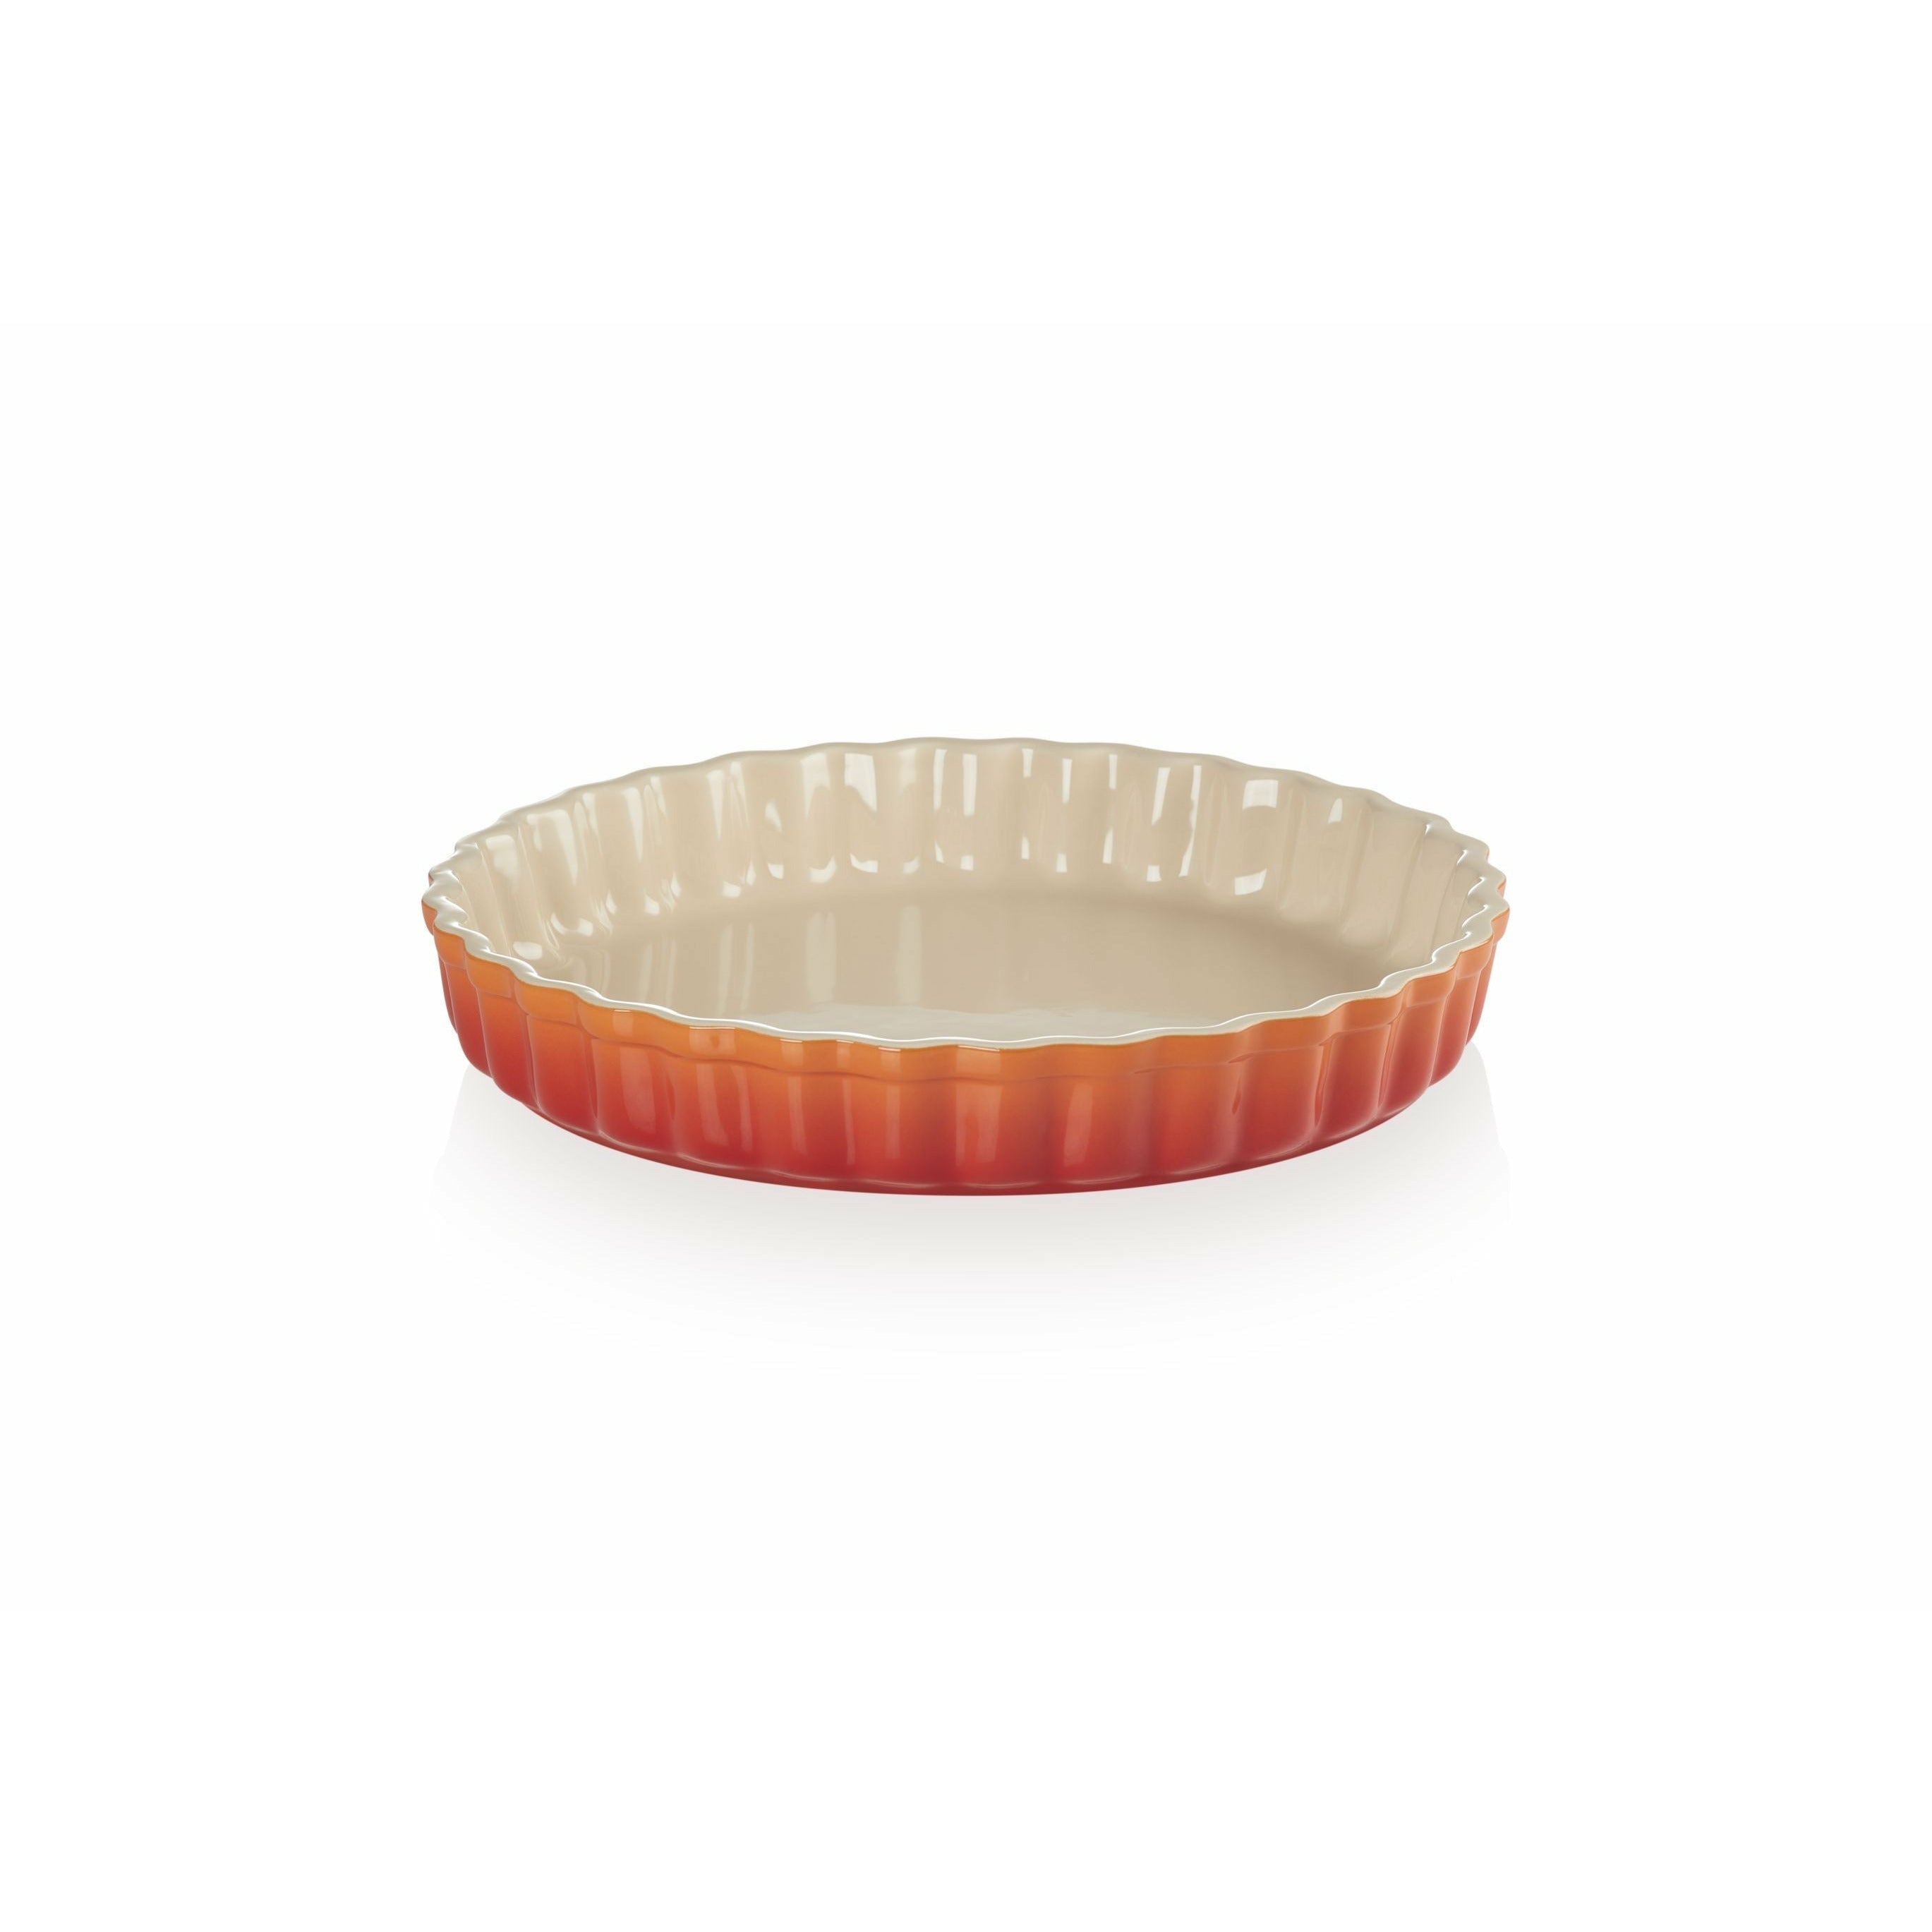 Le Creuset Heritage Cake Tin 28 Cm, Oven Red